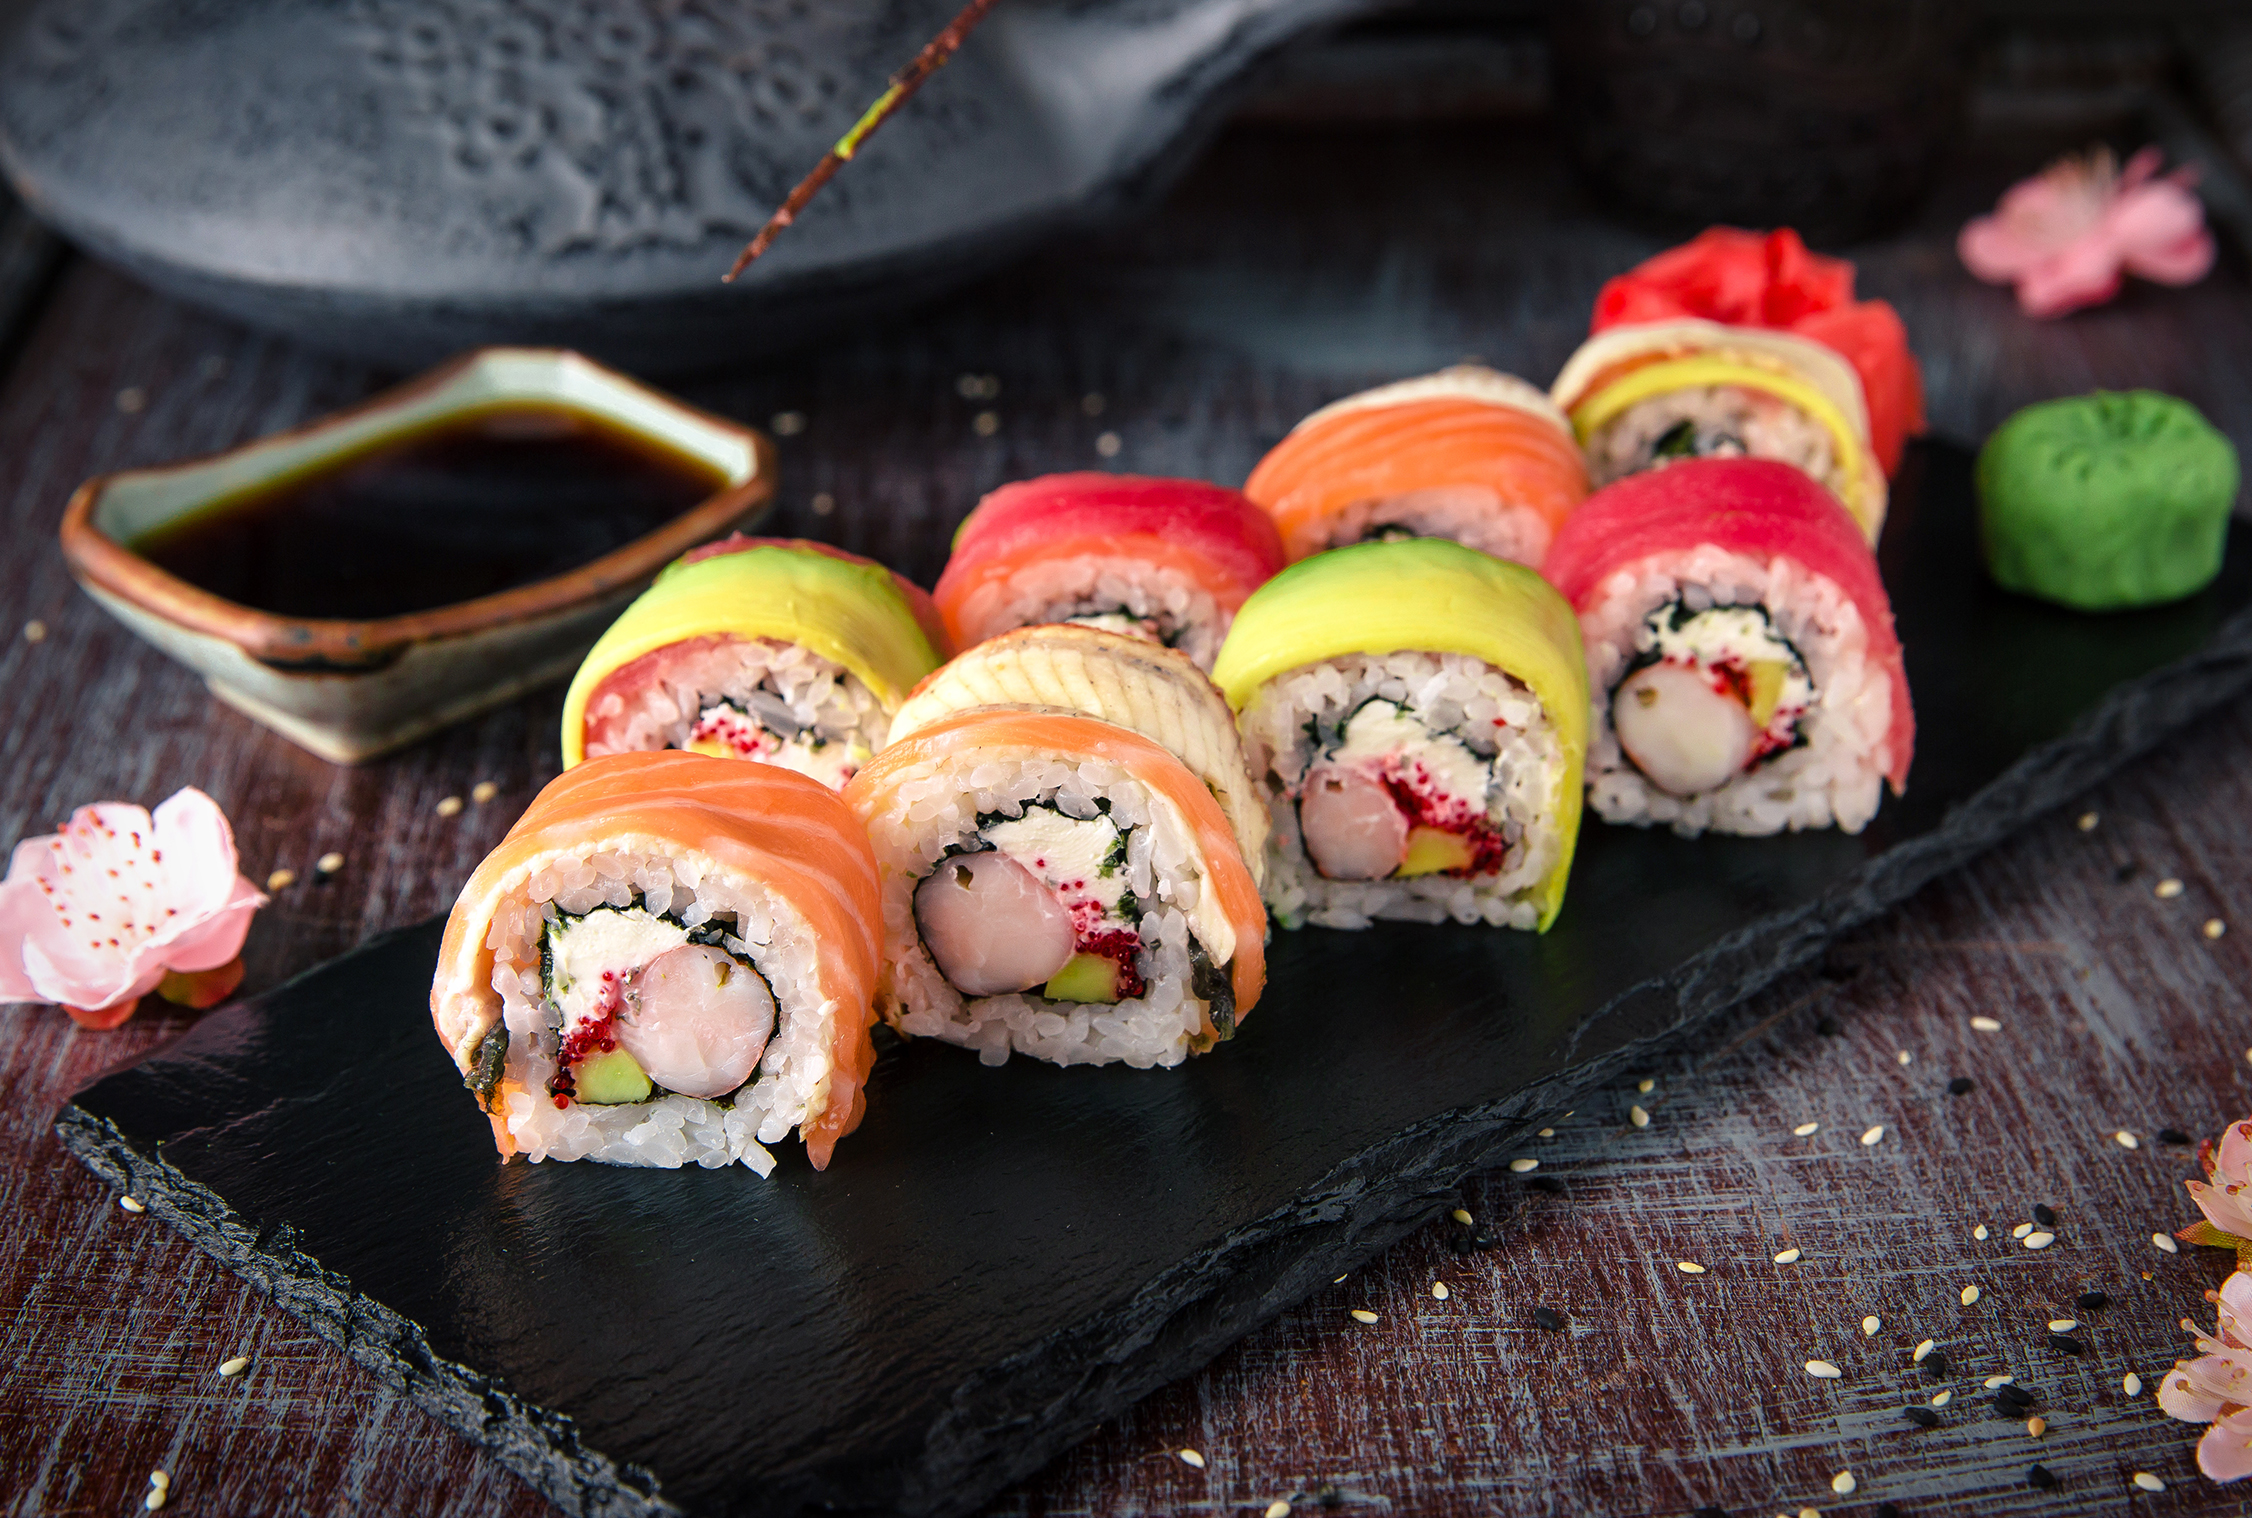 Team Sushi - Learn Sushi Making Skills | Hartley's Events